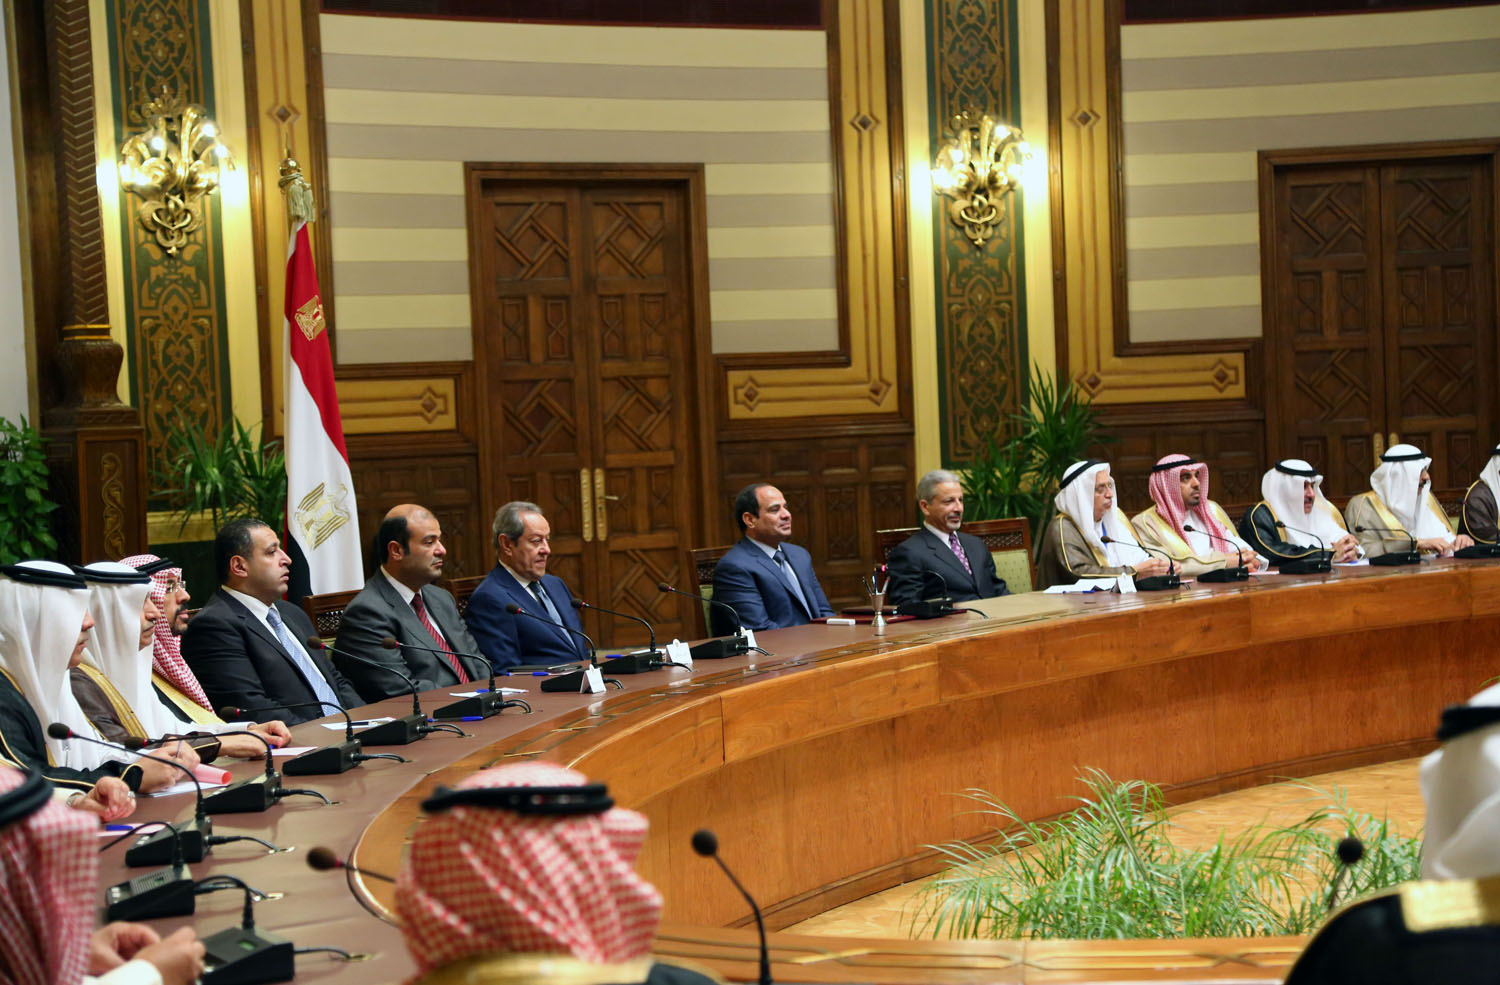 Egyptian President Abdelfatah Al-Sisi During a meeting with a visiting Saudi business delegation